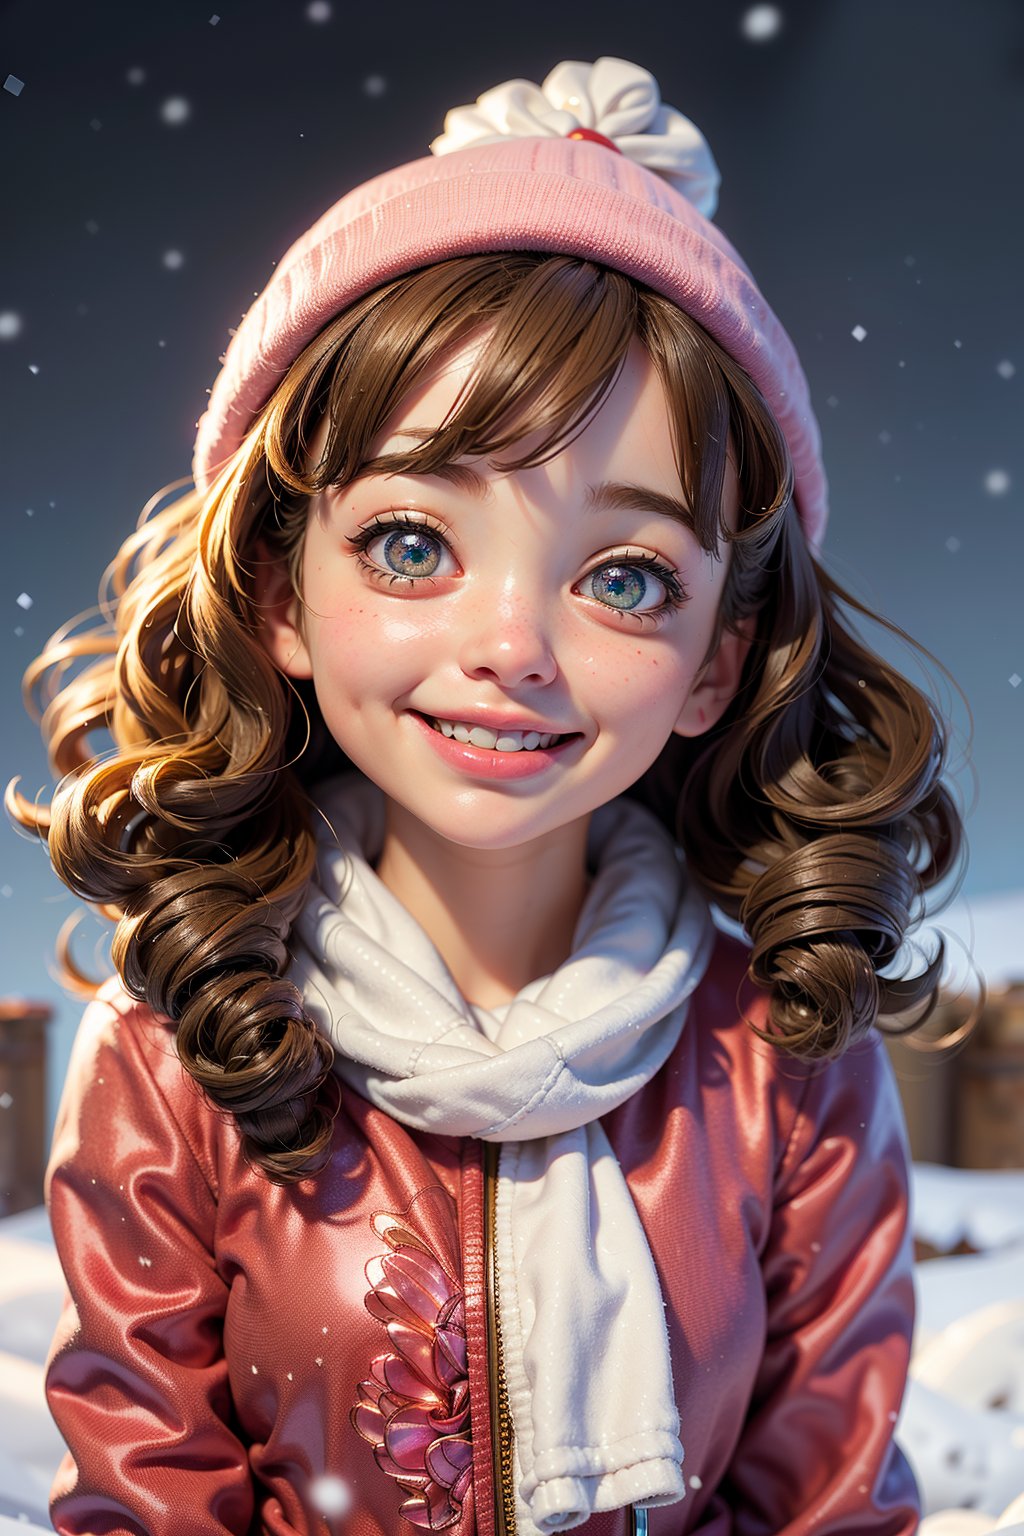 best quality,  cute little girl,  christmas outfit,  cute smiley,  blushing face,  detailed eyes,  detailed lips,  curly hair,  rosy cheeks,  sparkling eyes,  joyful expression,  snowy background,  winter scenery,  soft lighting,  vibrant colors,  festive atmosphere,<lora:EMS-209910-EMS:0.800000>